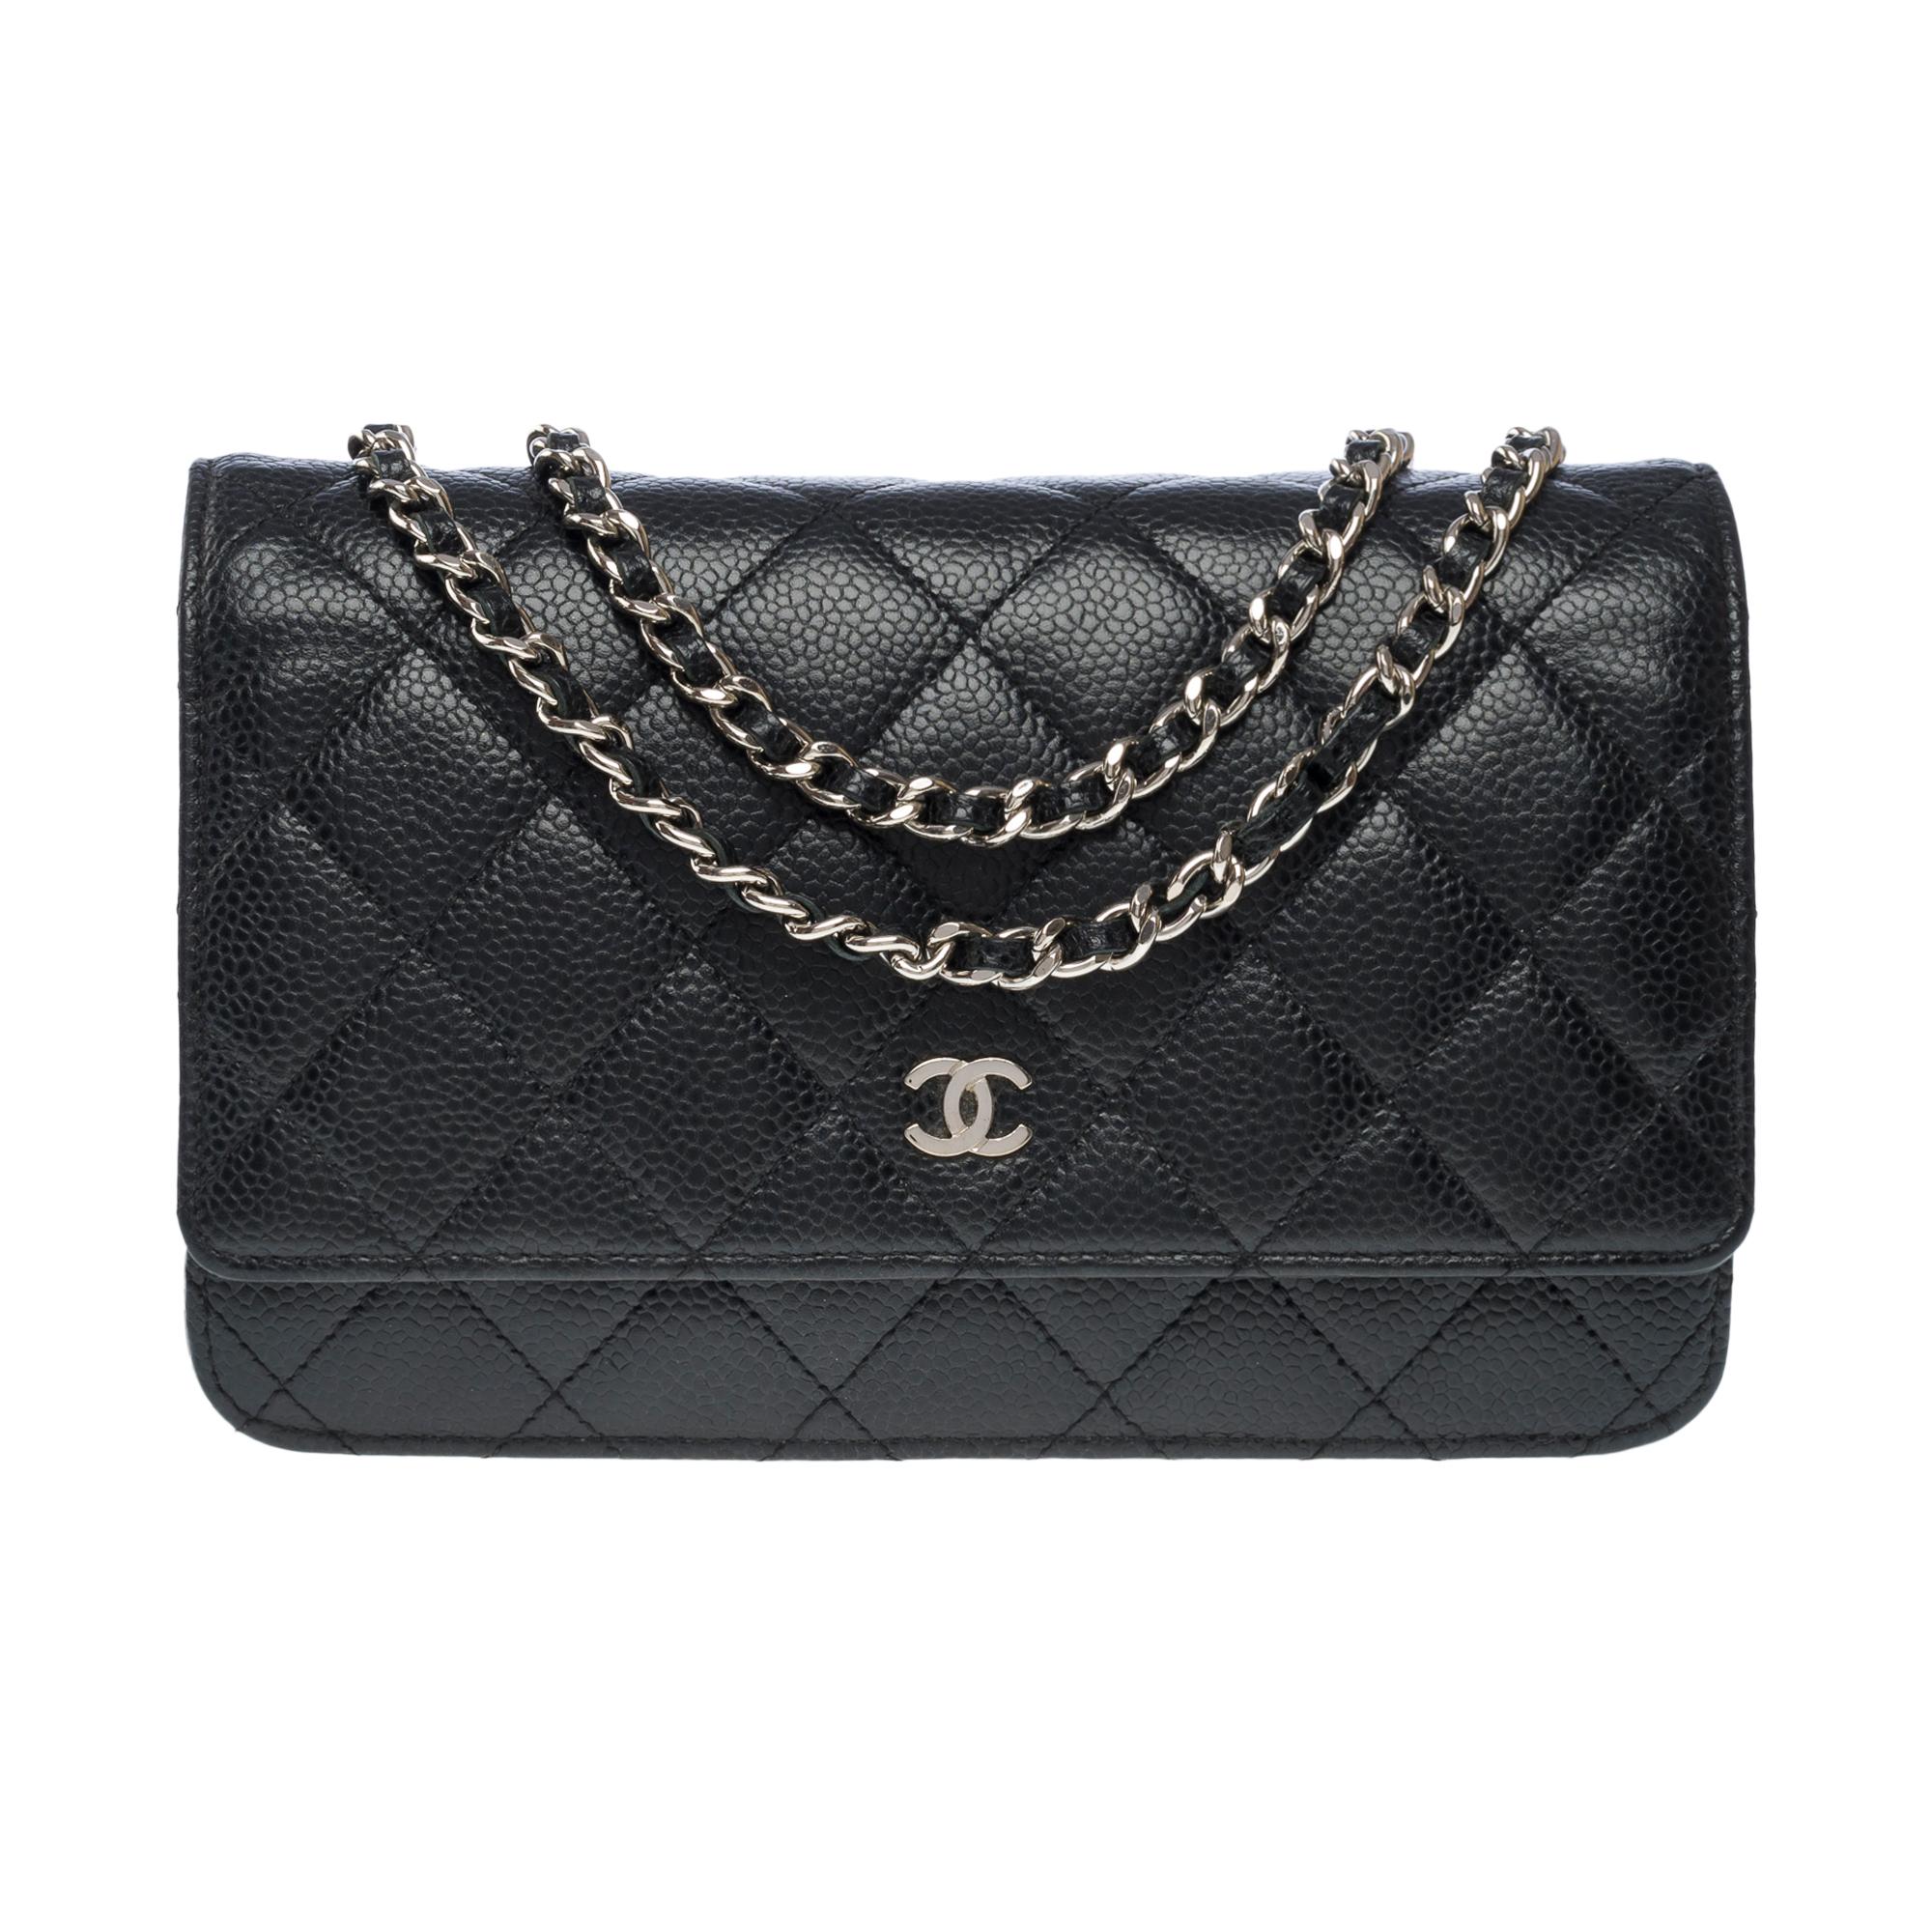 Gorgeous​​ ​​Chanel​​ ​​Wallet​​ ​​On​​ ​​Chain​​ ​​shoulder​​ ​​bag​​ ​​(WOC)​​ ​​in​​ ​​black​​ ​​quilted​​ ​​caviar​ ​leather,​​ ​​silver​​ ​​metal​​ ​​trim,​​ ​​a​​ ​​silver​​ ​​metal​​ ​​chain​​ ​​interlaced​​ ​​with​​ ​​black​​ ​​leather​​